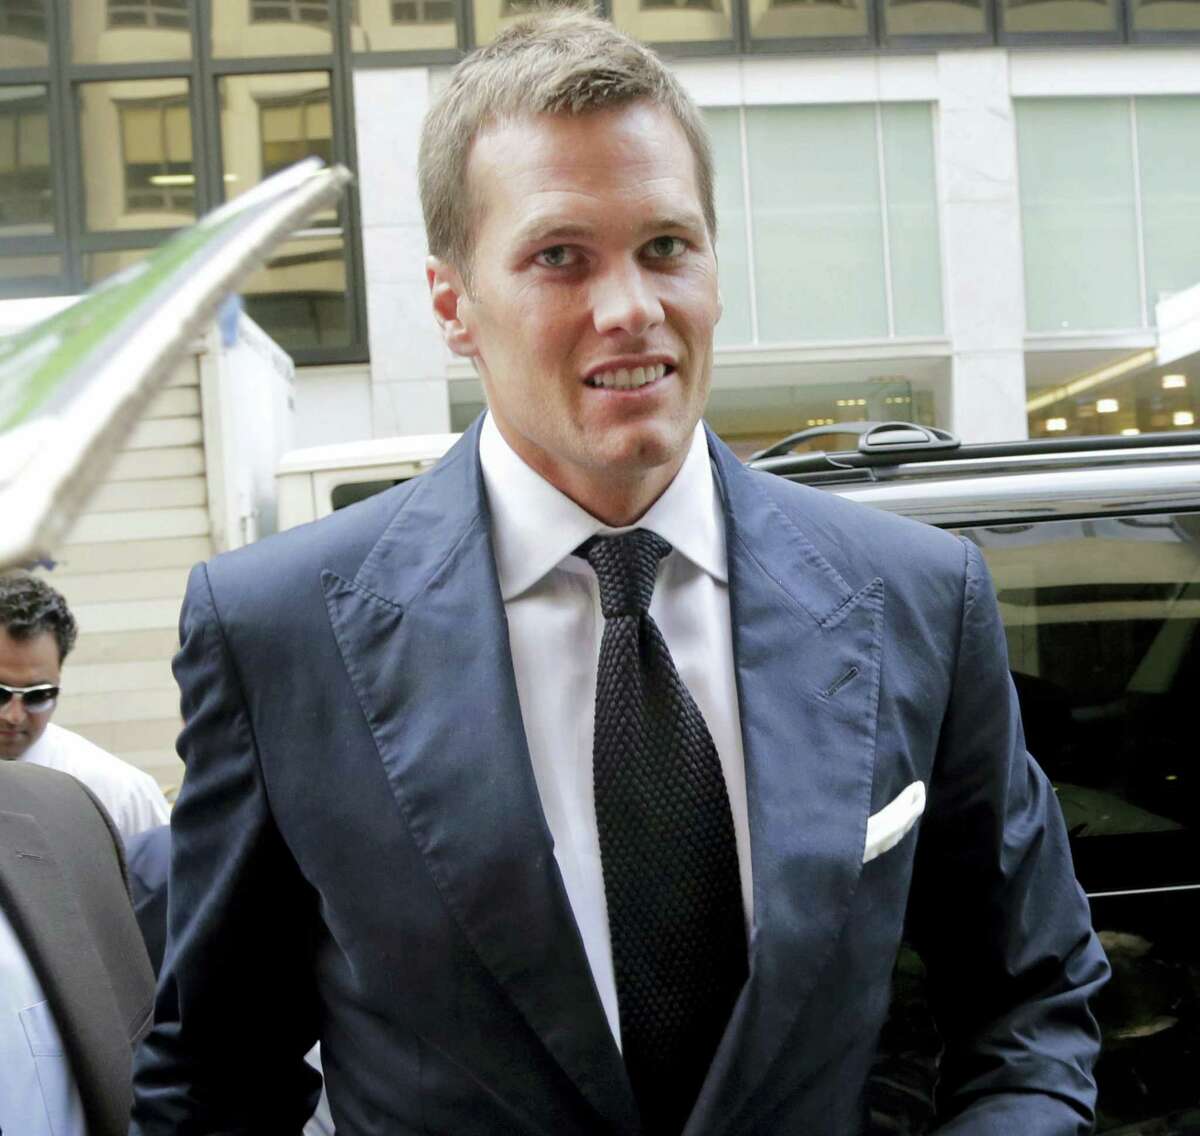 In this June 23, 2015 photo, New England Patriots quarterback Tom Brady arrives for his appeal hearing at NFL headquarters in New York. A federal appeals court ruled April 25, 2016 that Tom Brady must serve a four-game “Deflategate” suspension imposed by the NFL, overturning a lower judge and siding with the league in a battle with the players union.